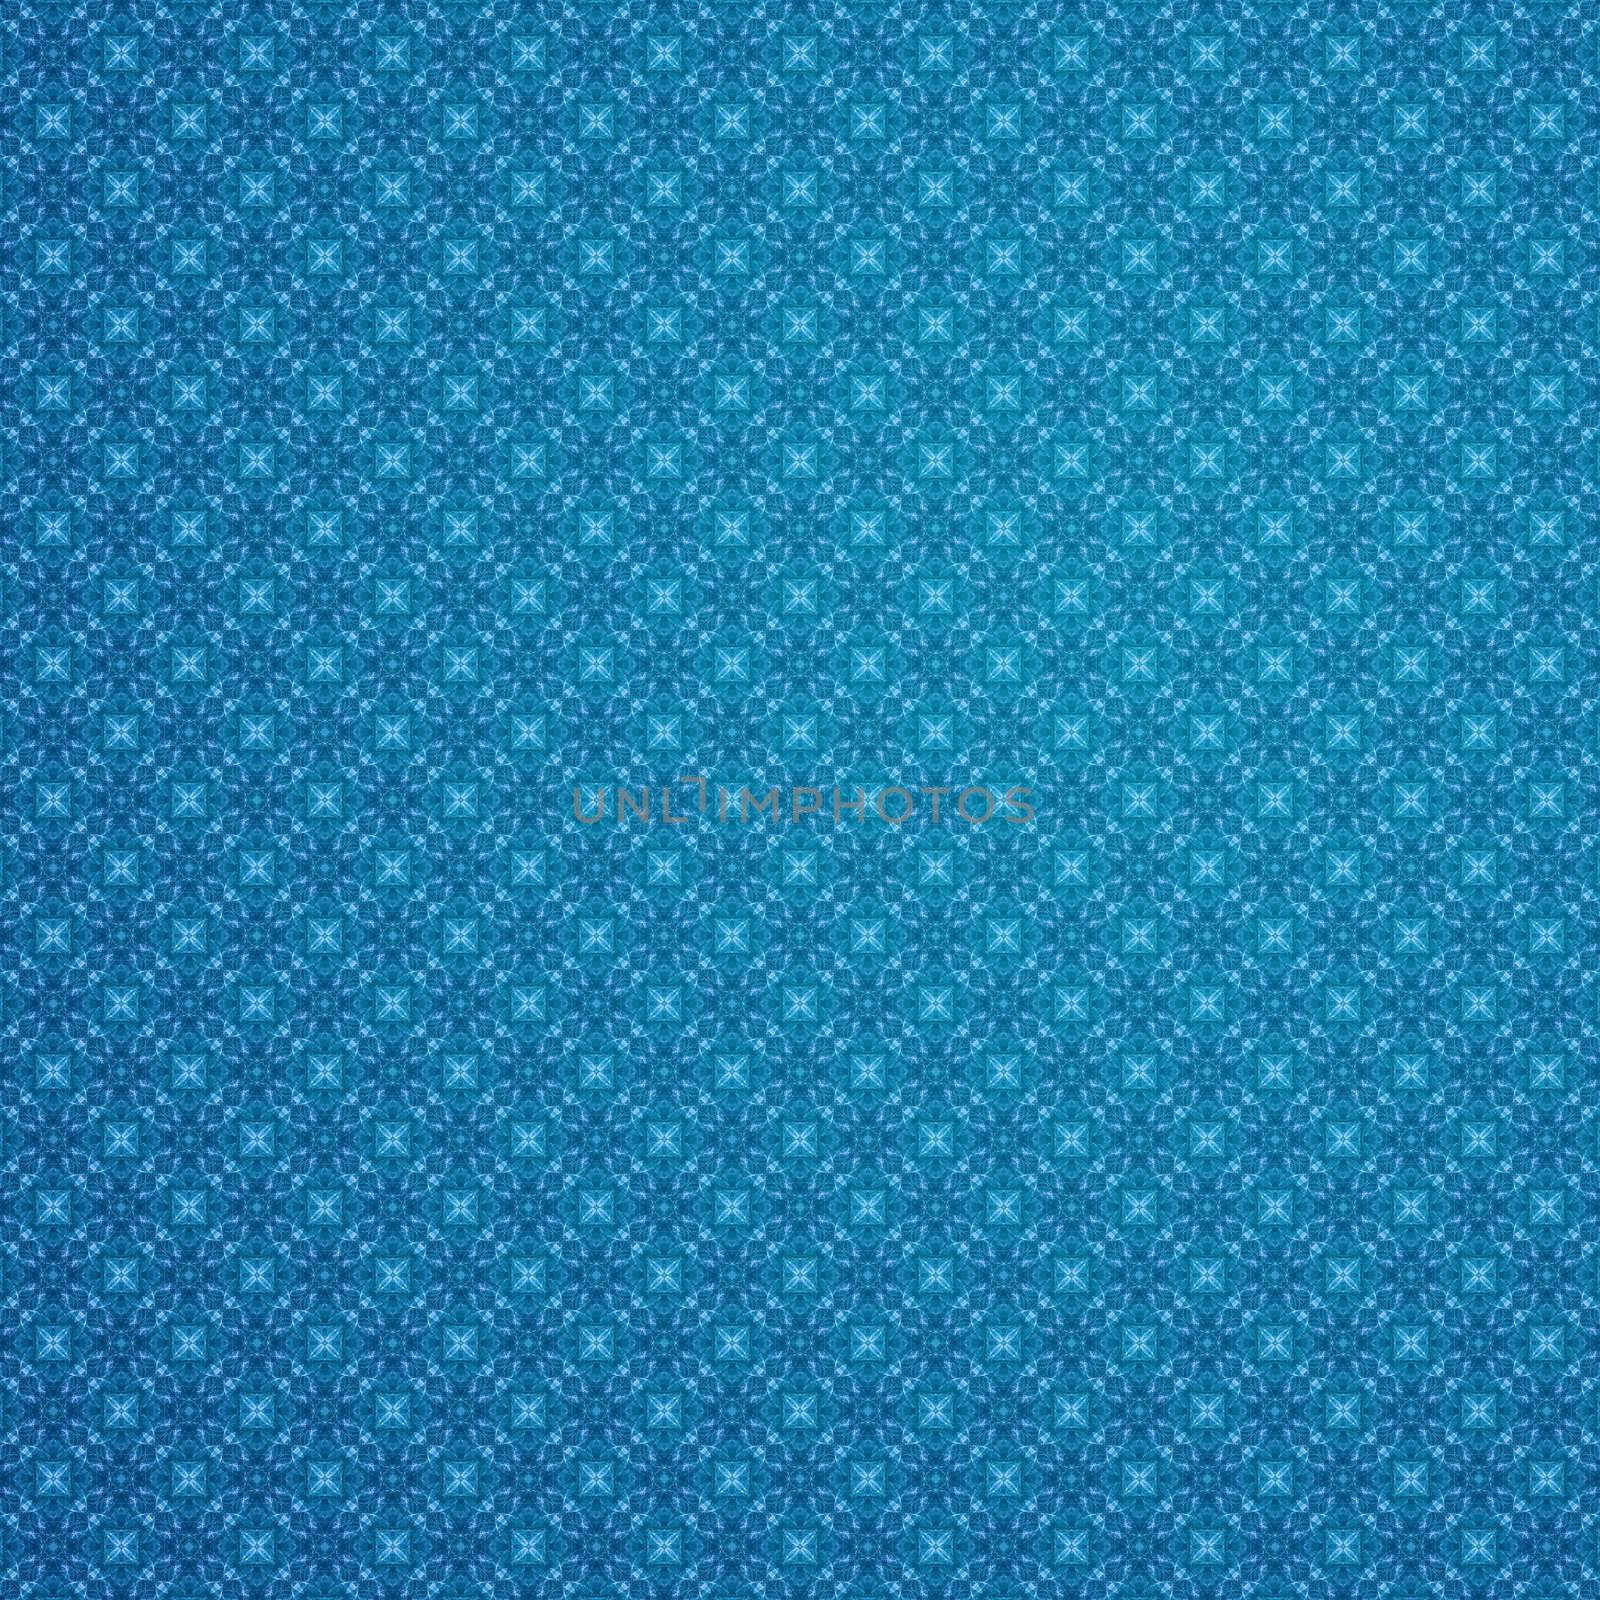 An image of a blue vintage wallpaper background